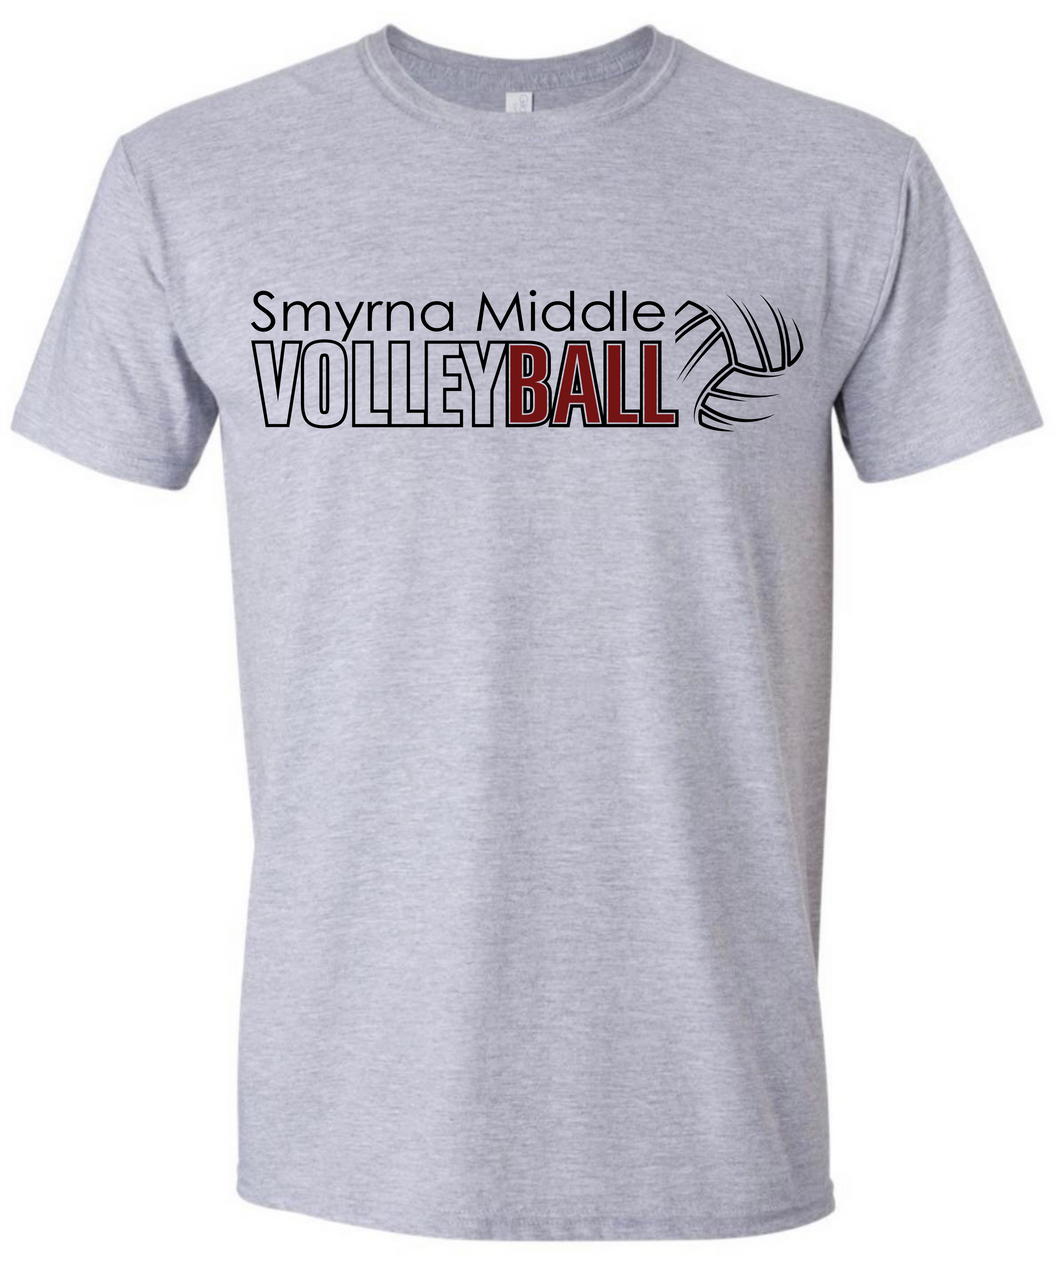 Smyrna Middle Abstract Volleyball Tshirt